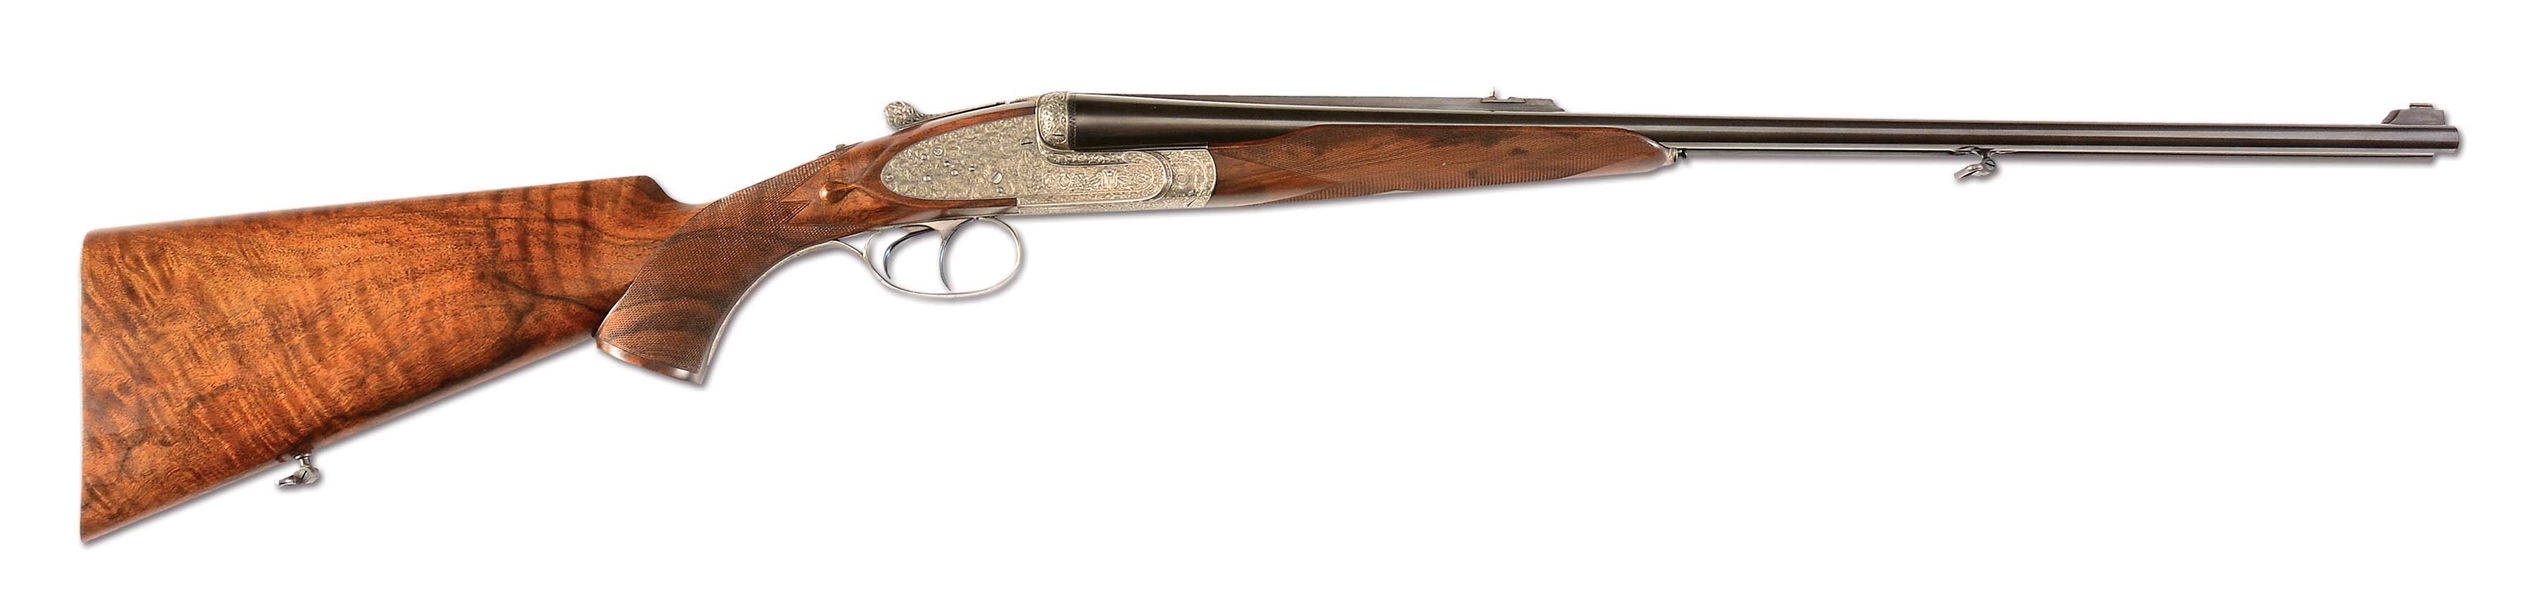 (M) SUPERB LEBEAU COURALLY SIDELOCK EJECTOR DOUBLE RIFLE IN 9.3X74R WITH BAROQUE ENGRAVING BY CAPECE.